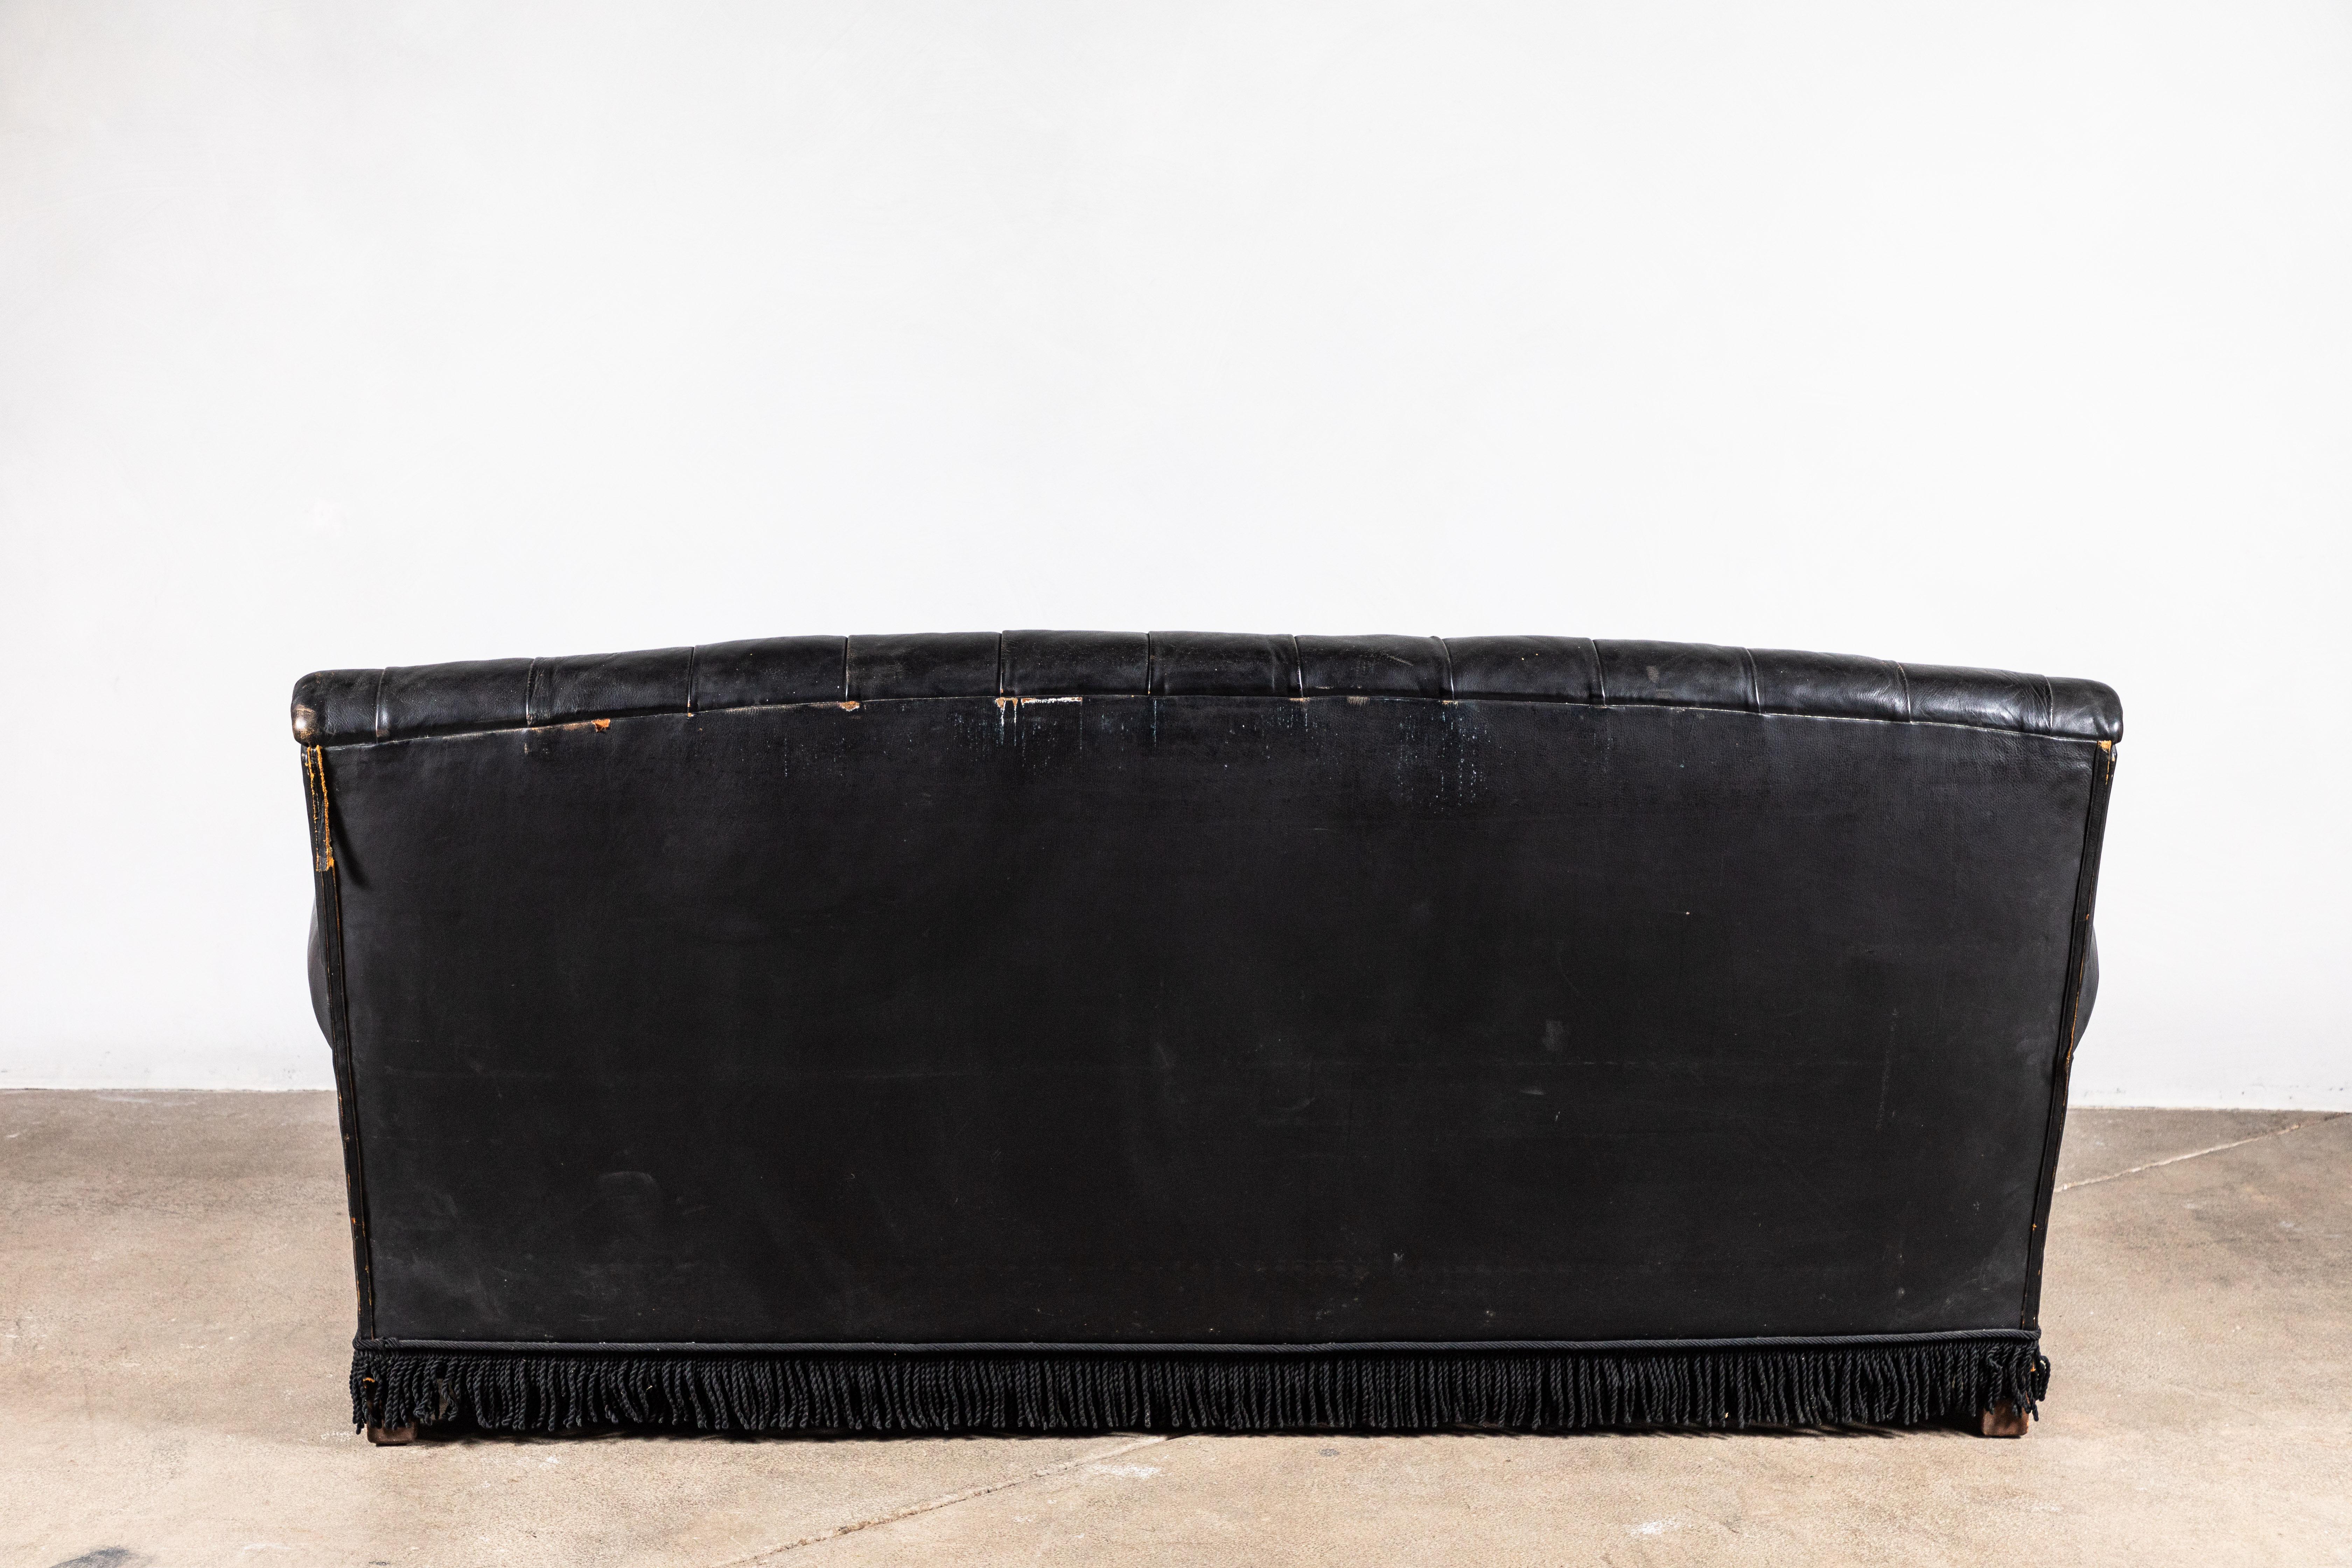 American Black Leather Tufted Sofa with Tufting and a Fringed Base